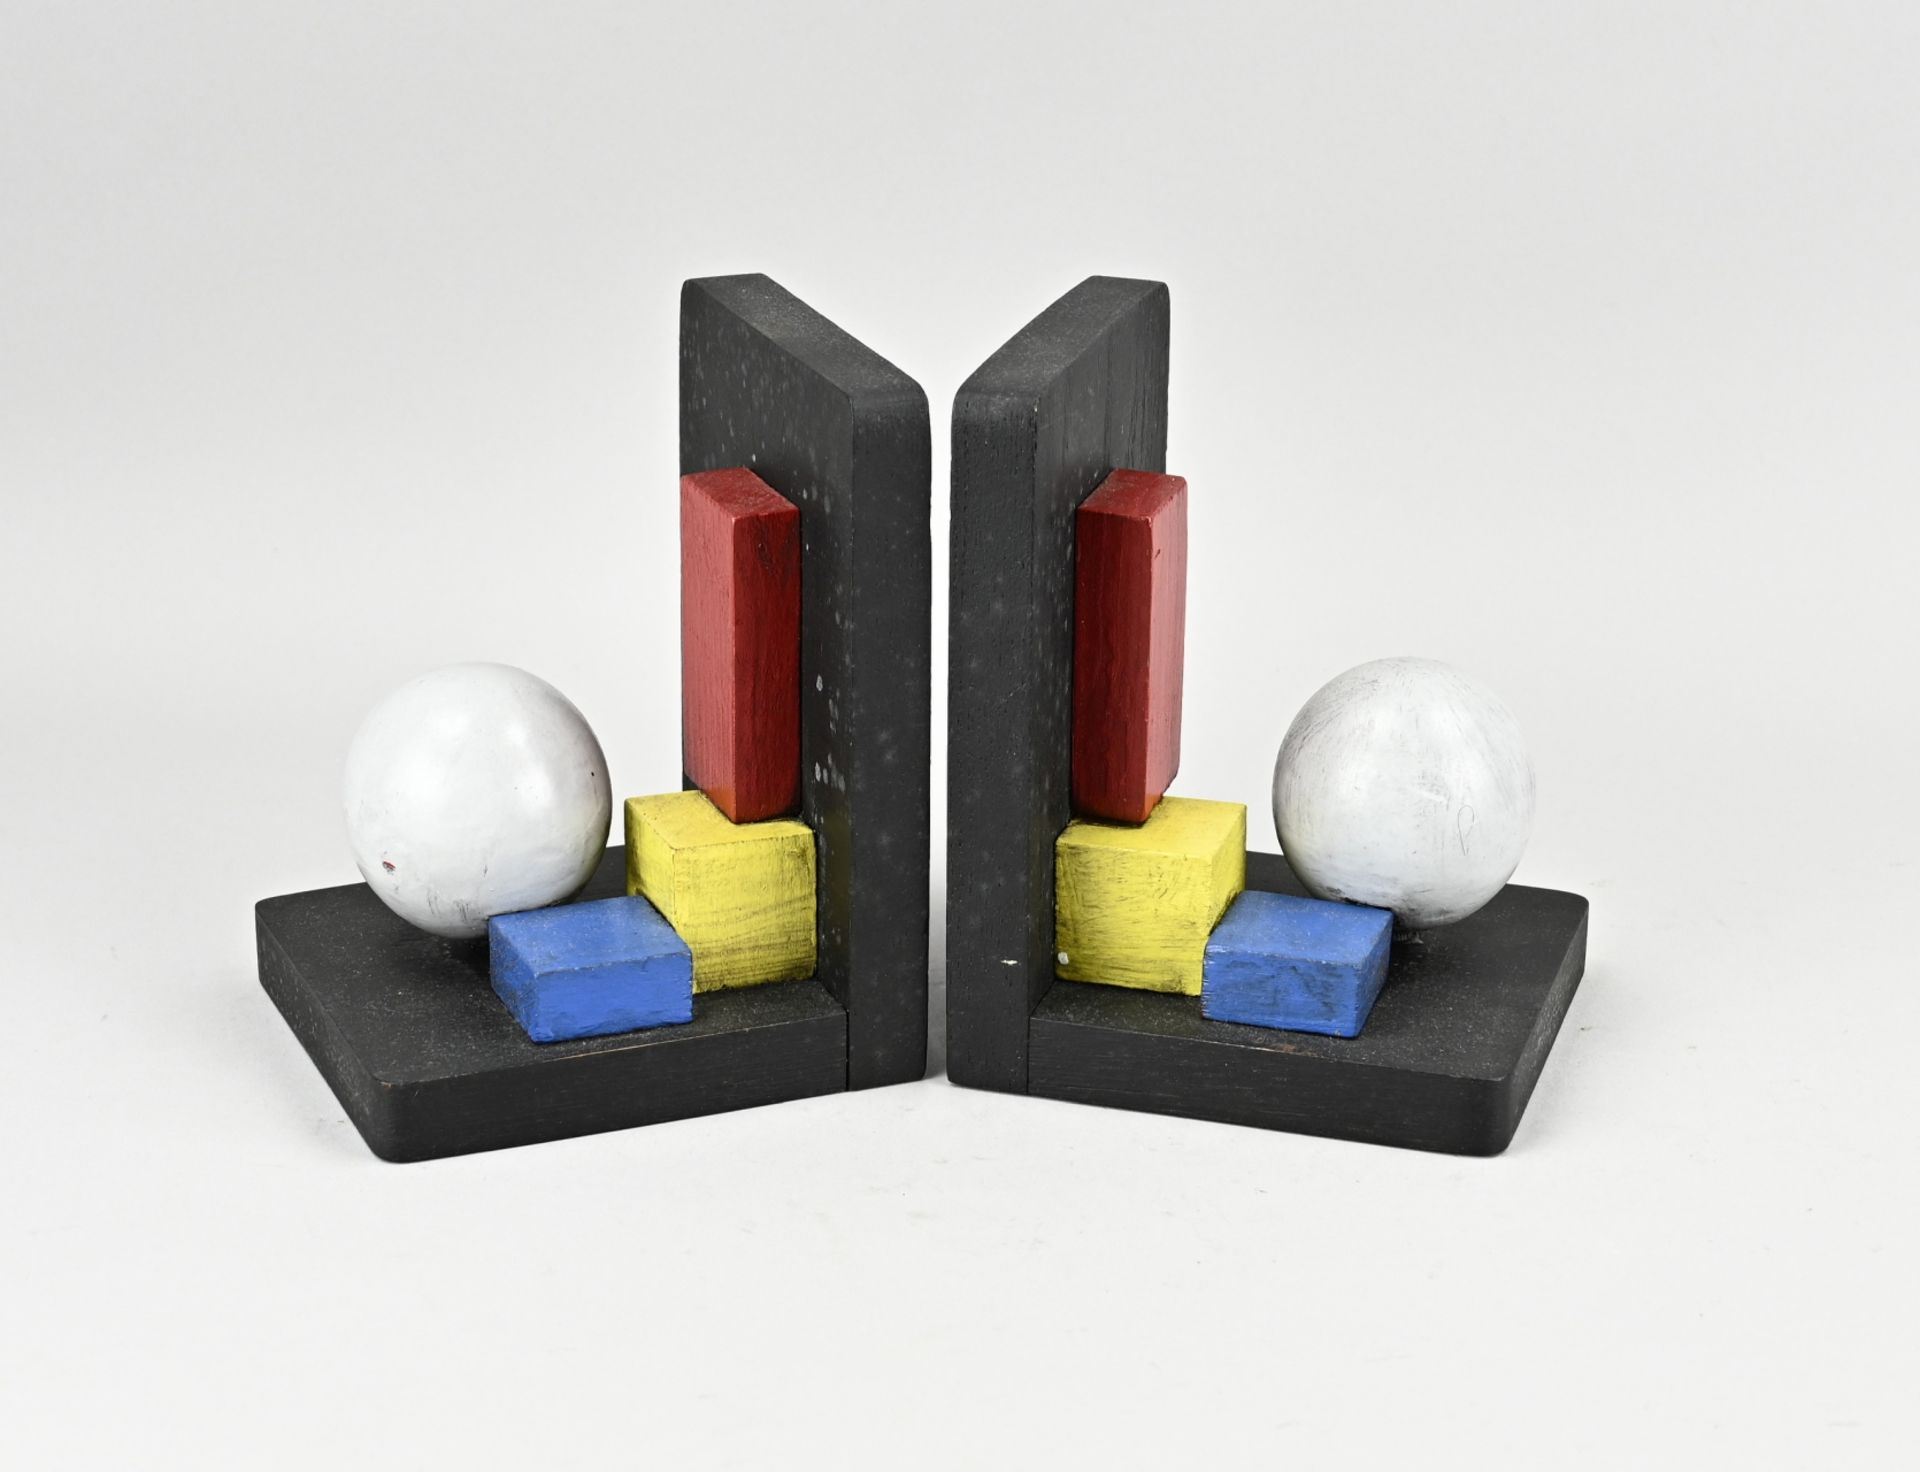 2x Wooden bookend